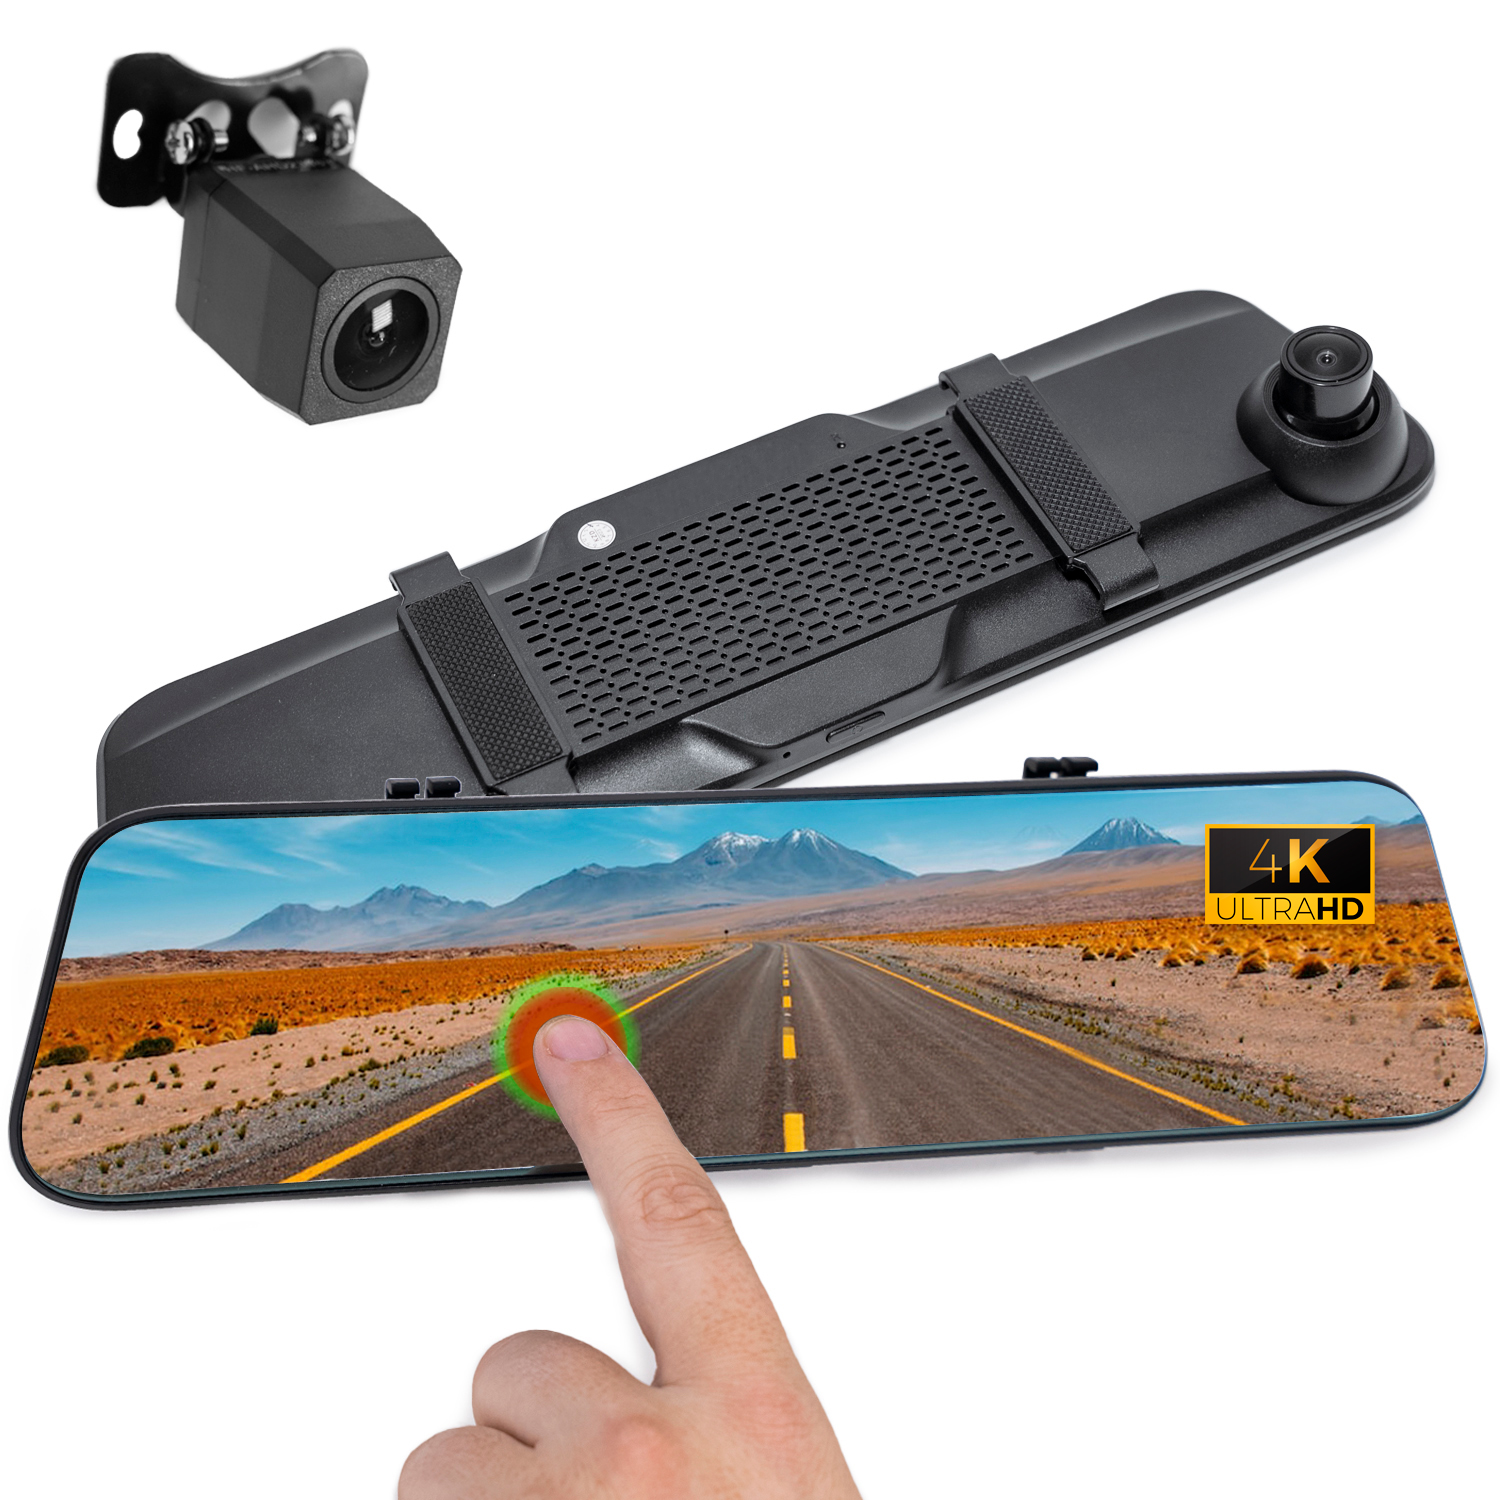 Veement VU12 Mirror dash cam install and review from 👉The O family #veement  #dashcam #mirrordashcam, By Veement